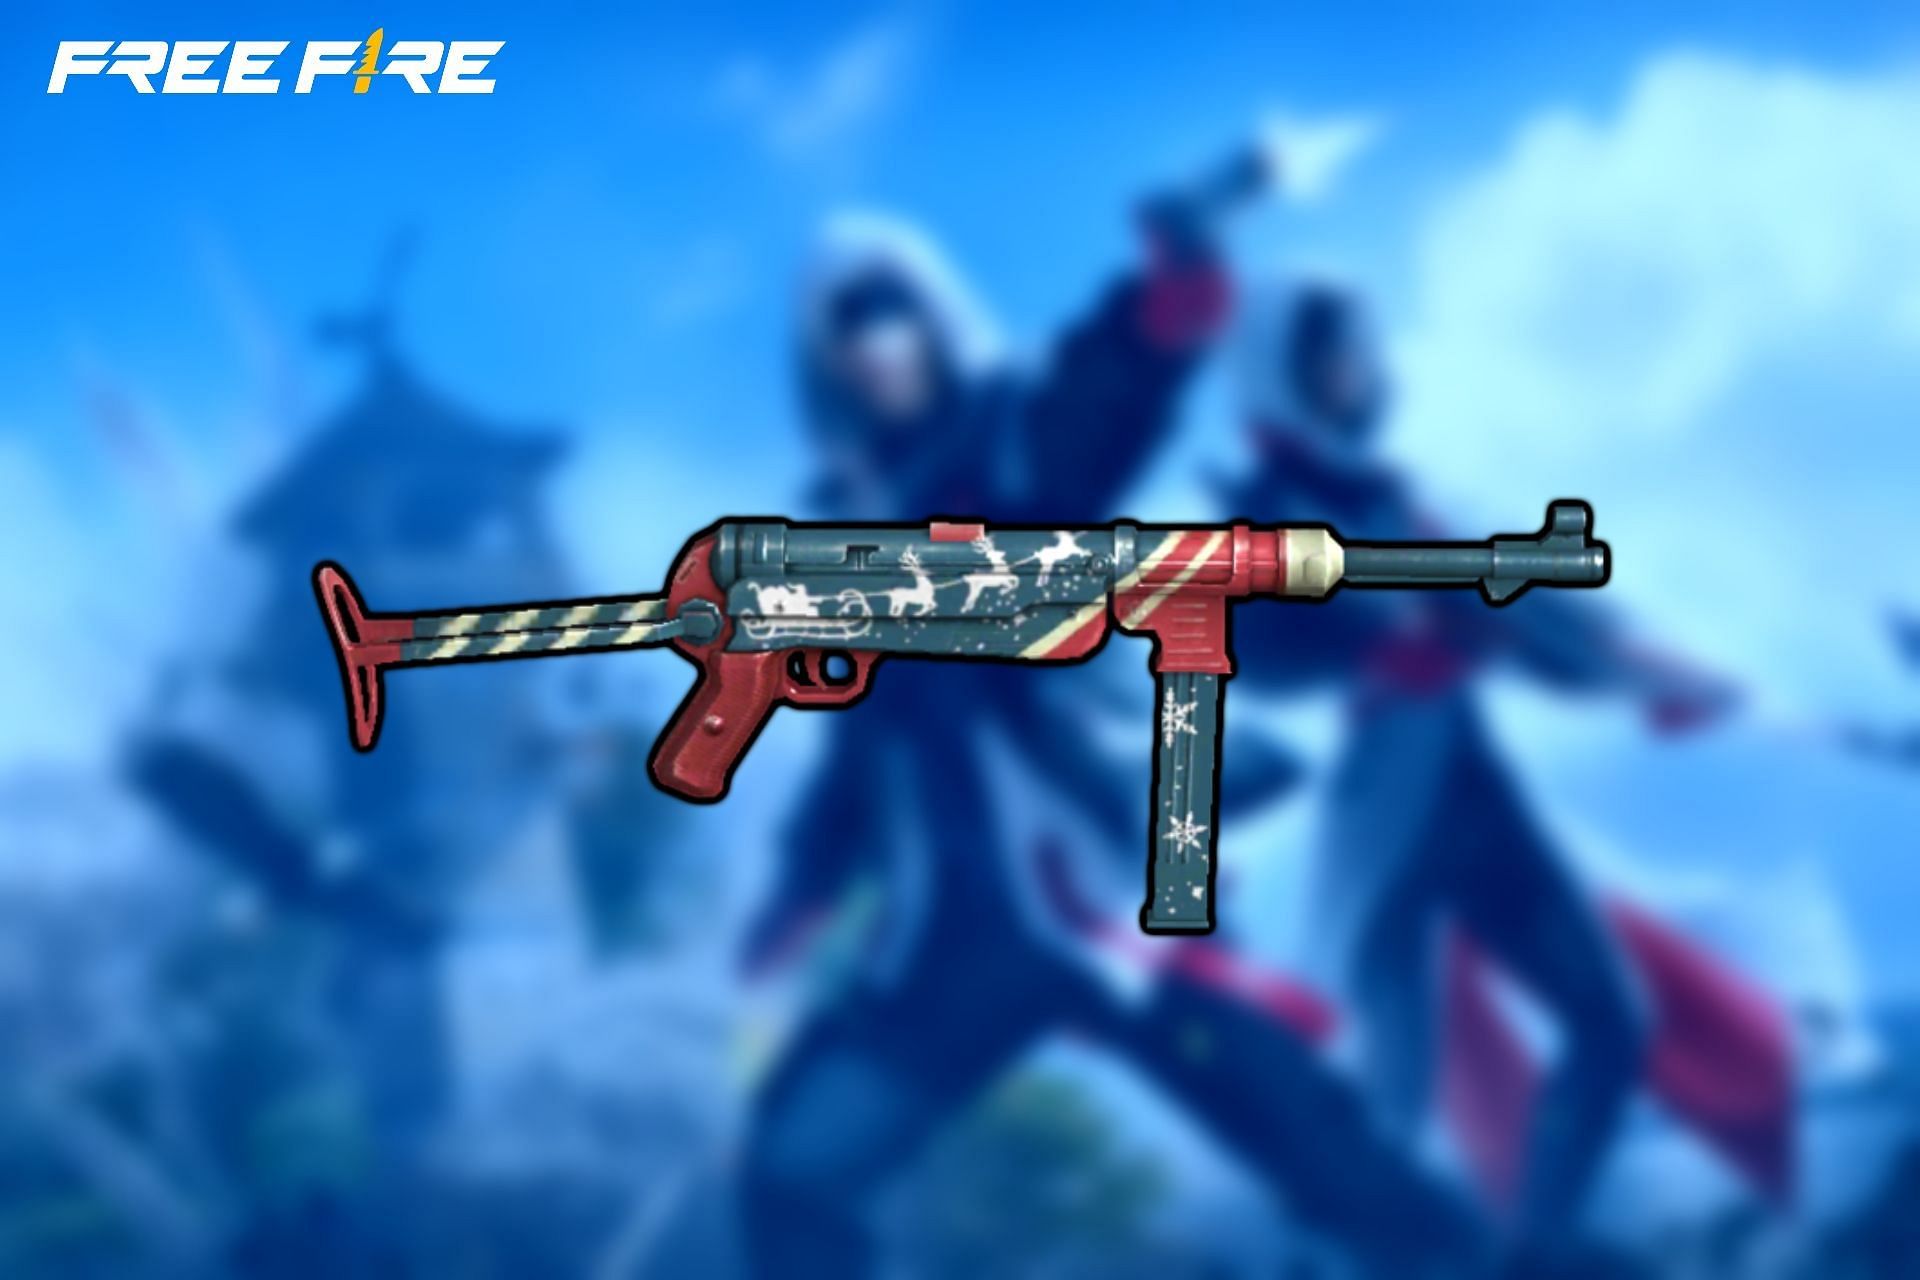 Garena Free Fire redeem codes February: Claim skins, weapons